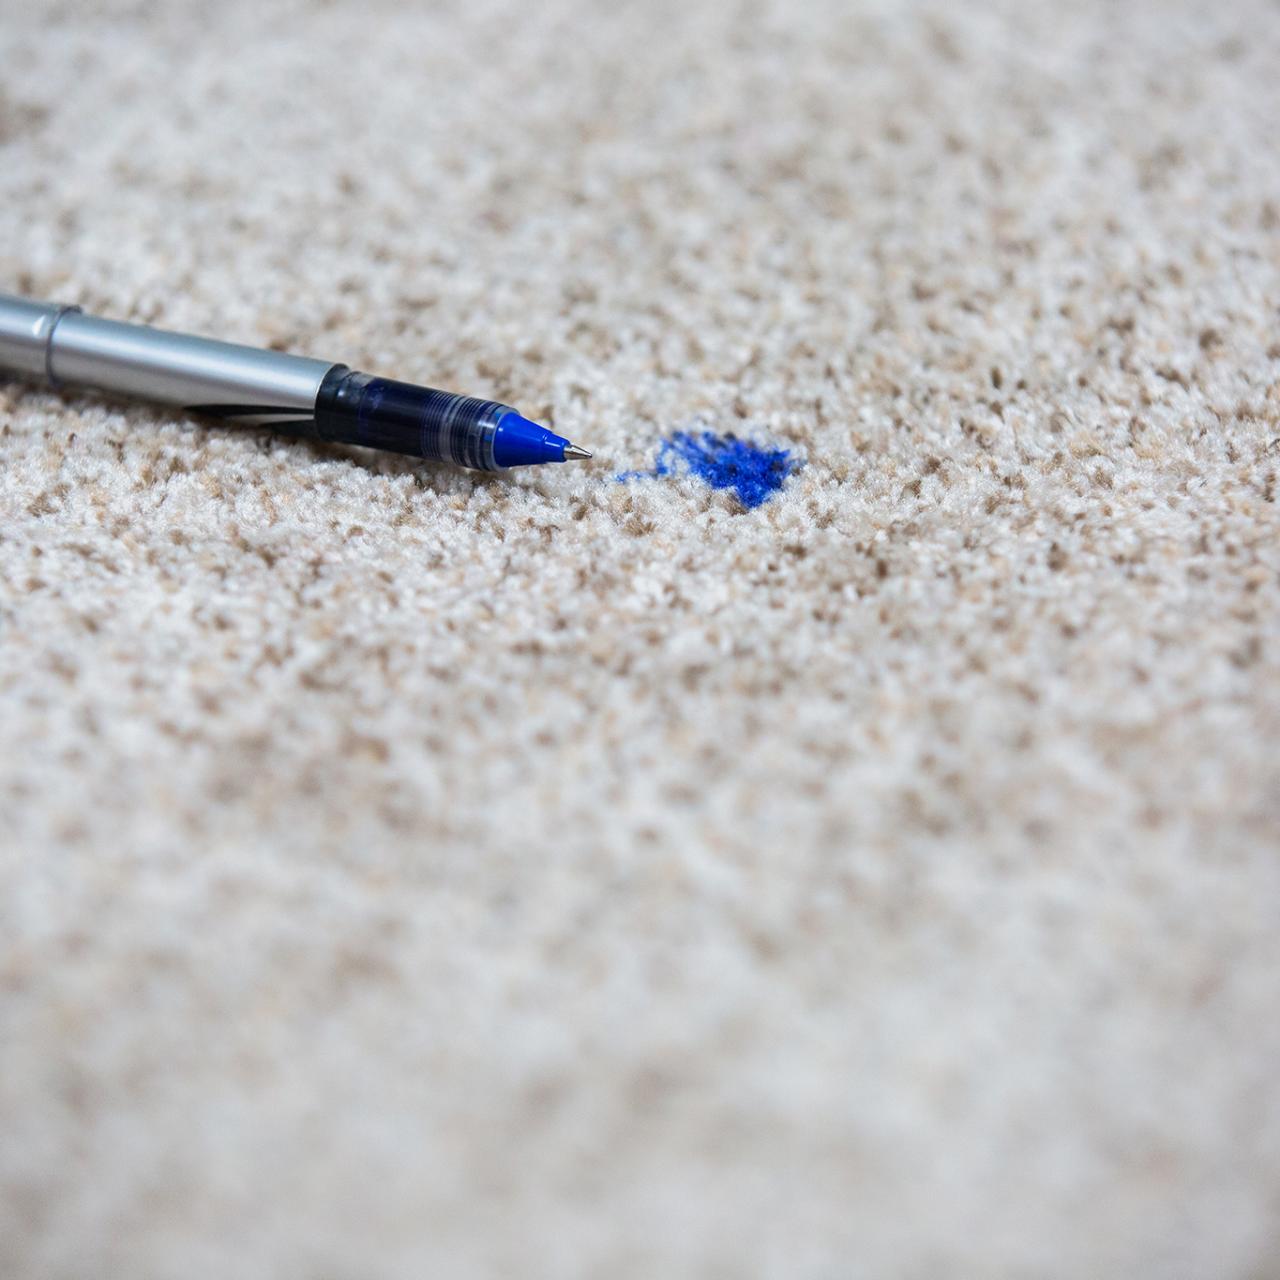 How To Remove An Ink Stain From Carpet Hgtv